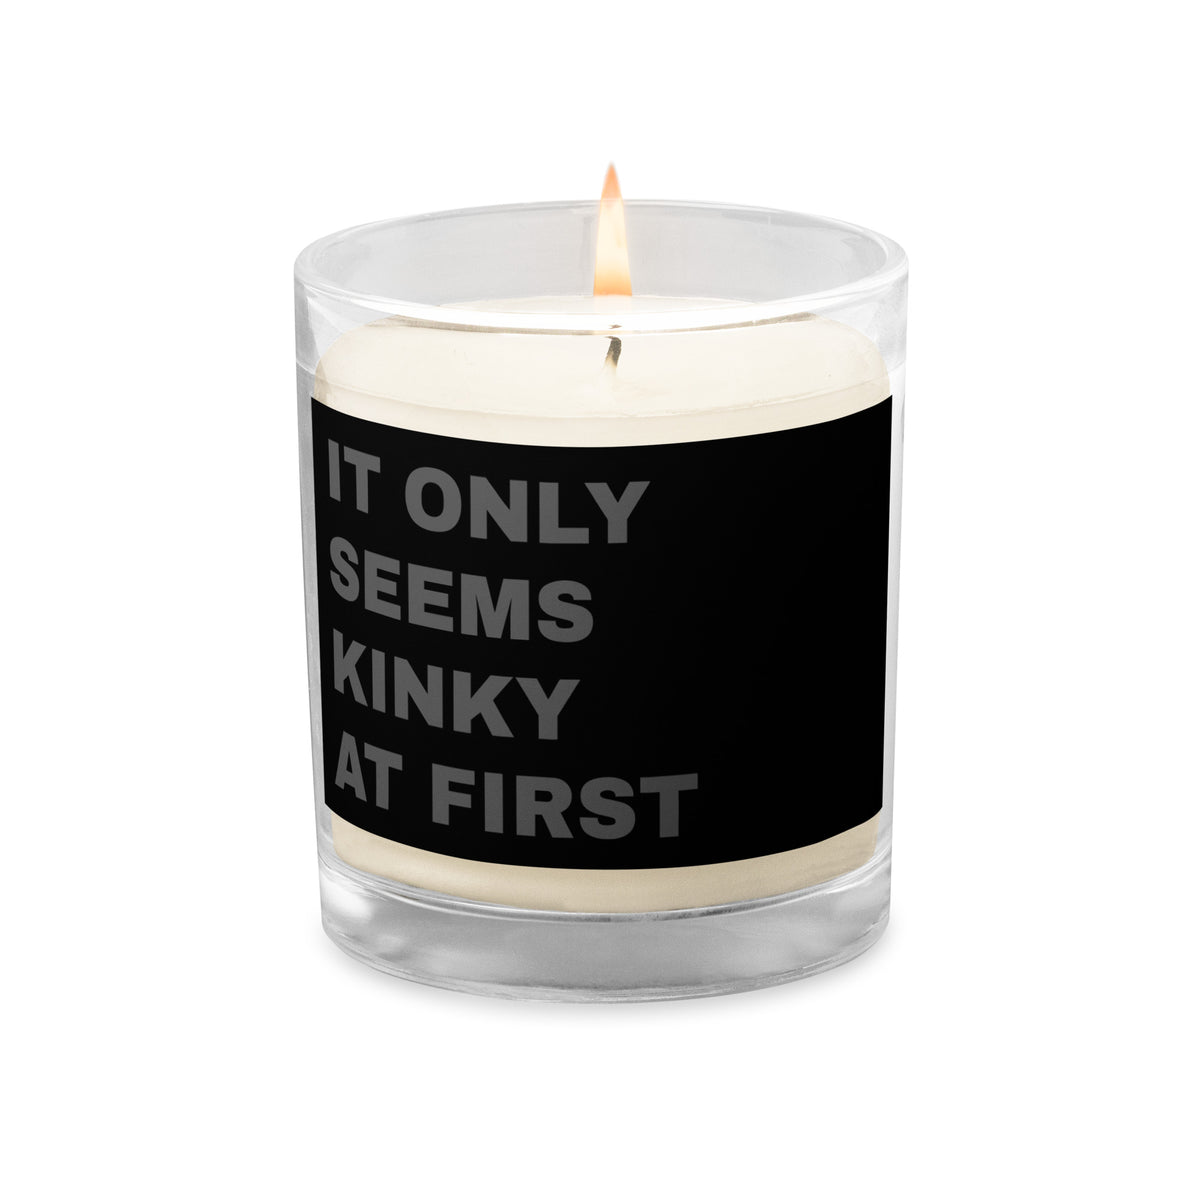 Kinky at First Candle